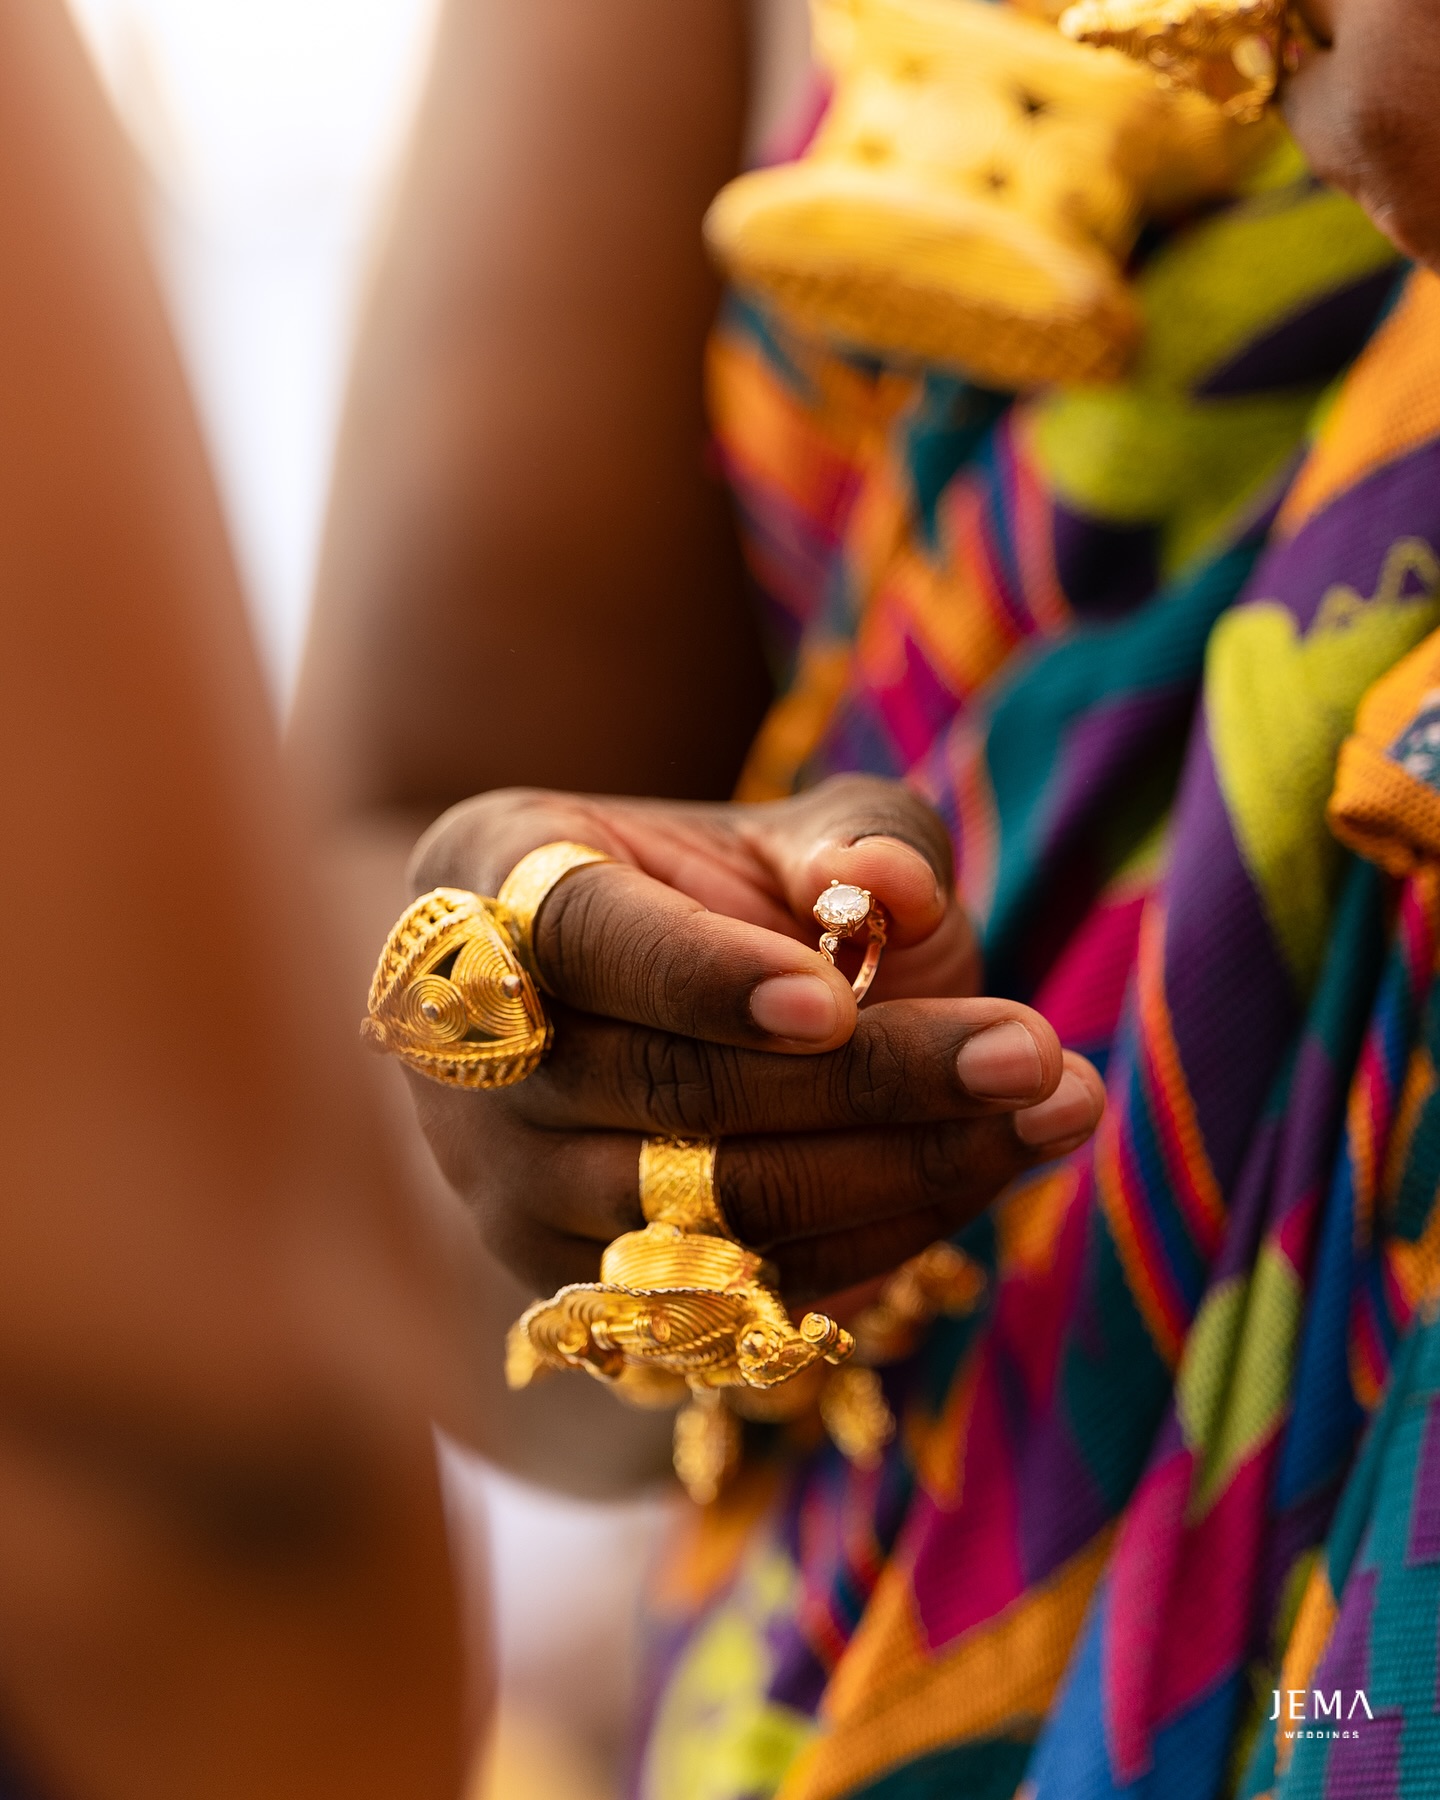 A guide to unique Ghanaian wedding traditions, customs and rituals | Kele+